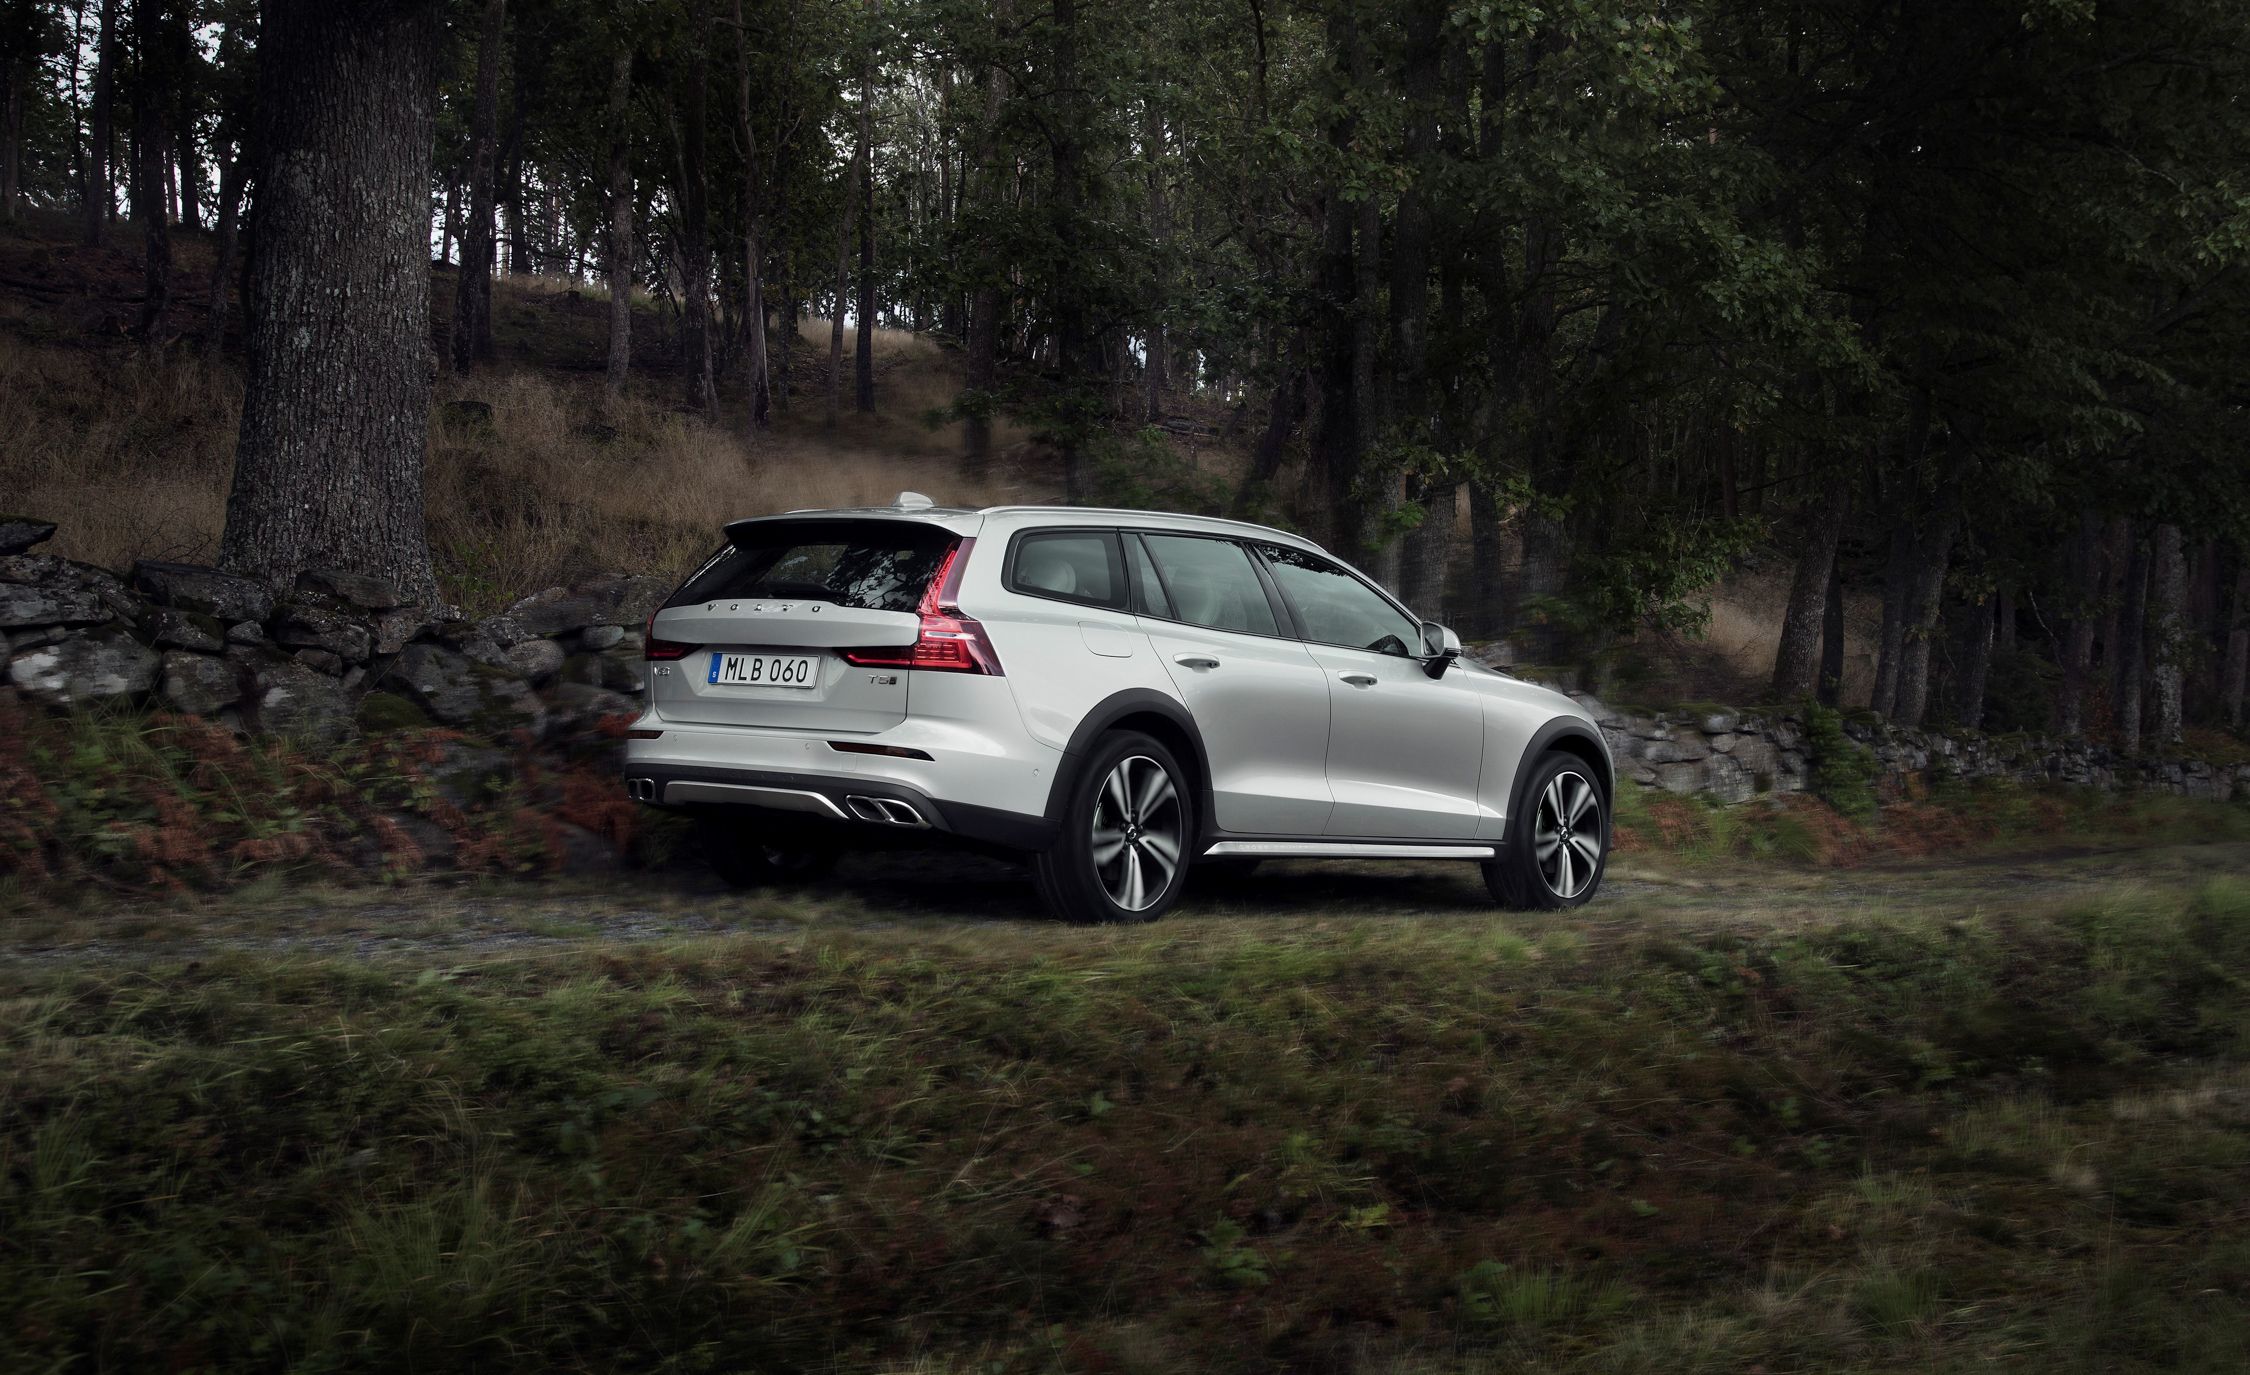 New Volvo V60 Wagon Gets The Cross Country Treatment And It Looks Great